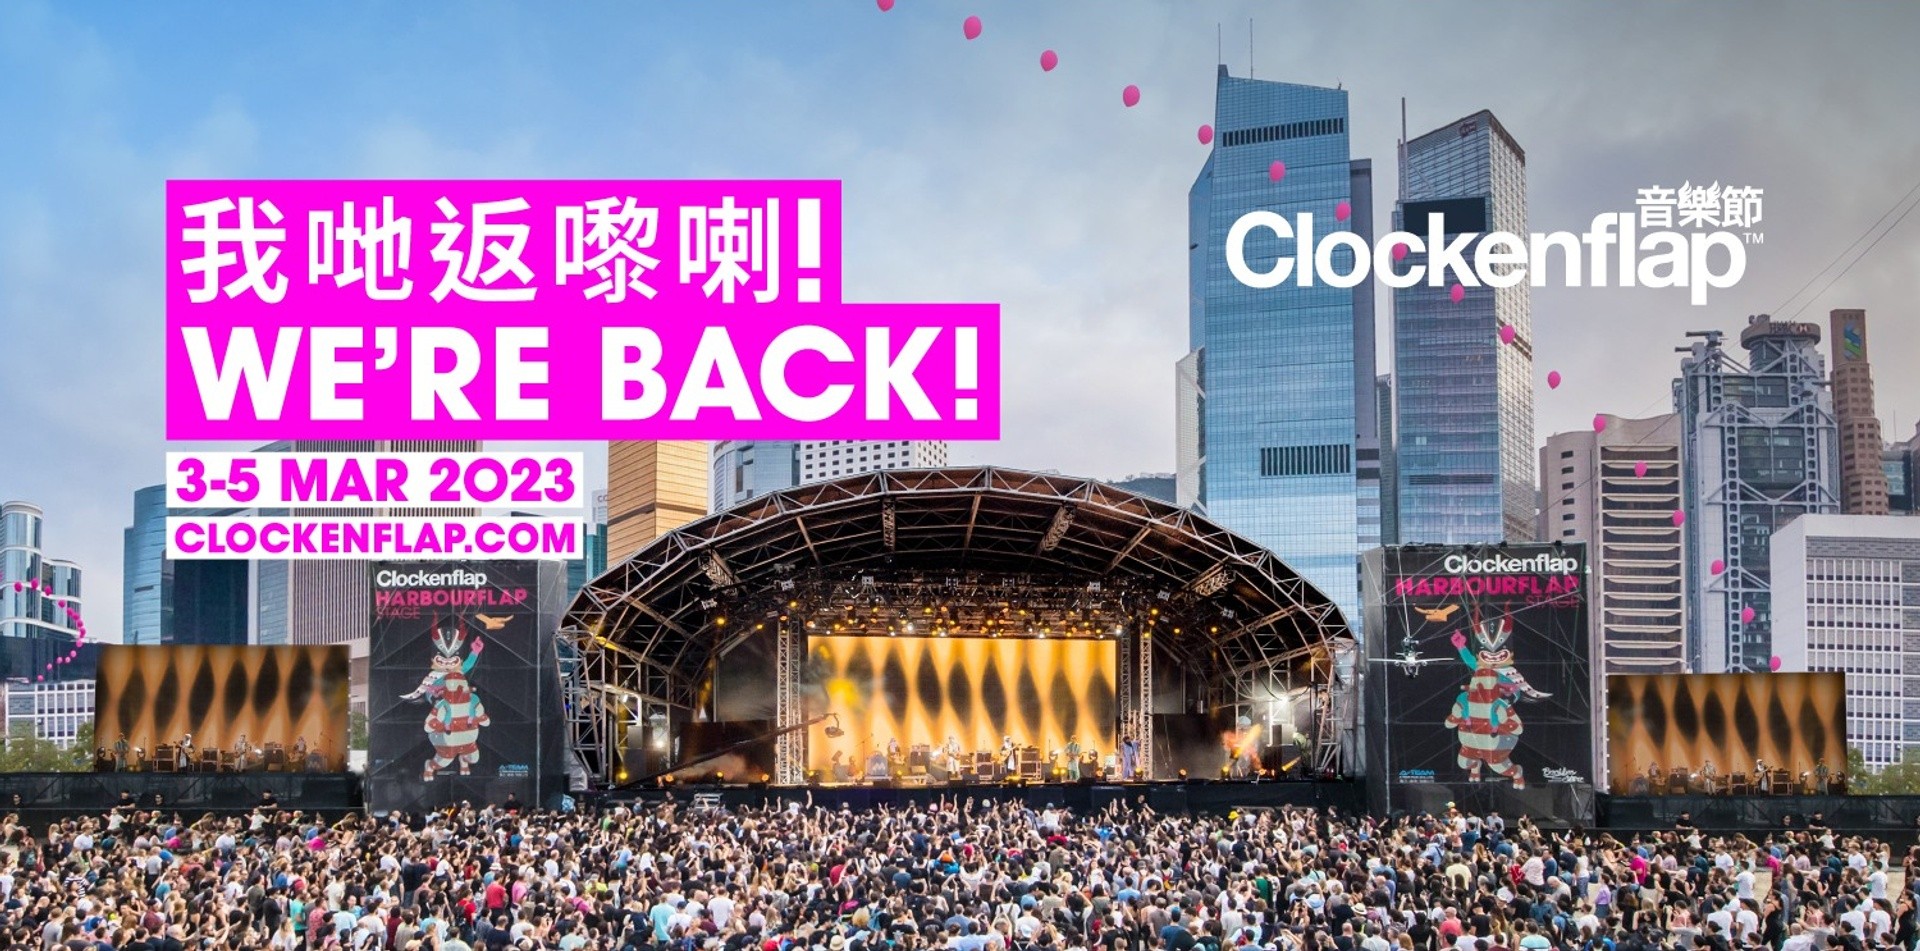 Save the date, Clockenflap to return in 2023